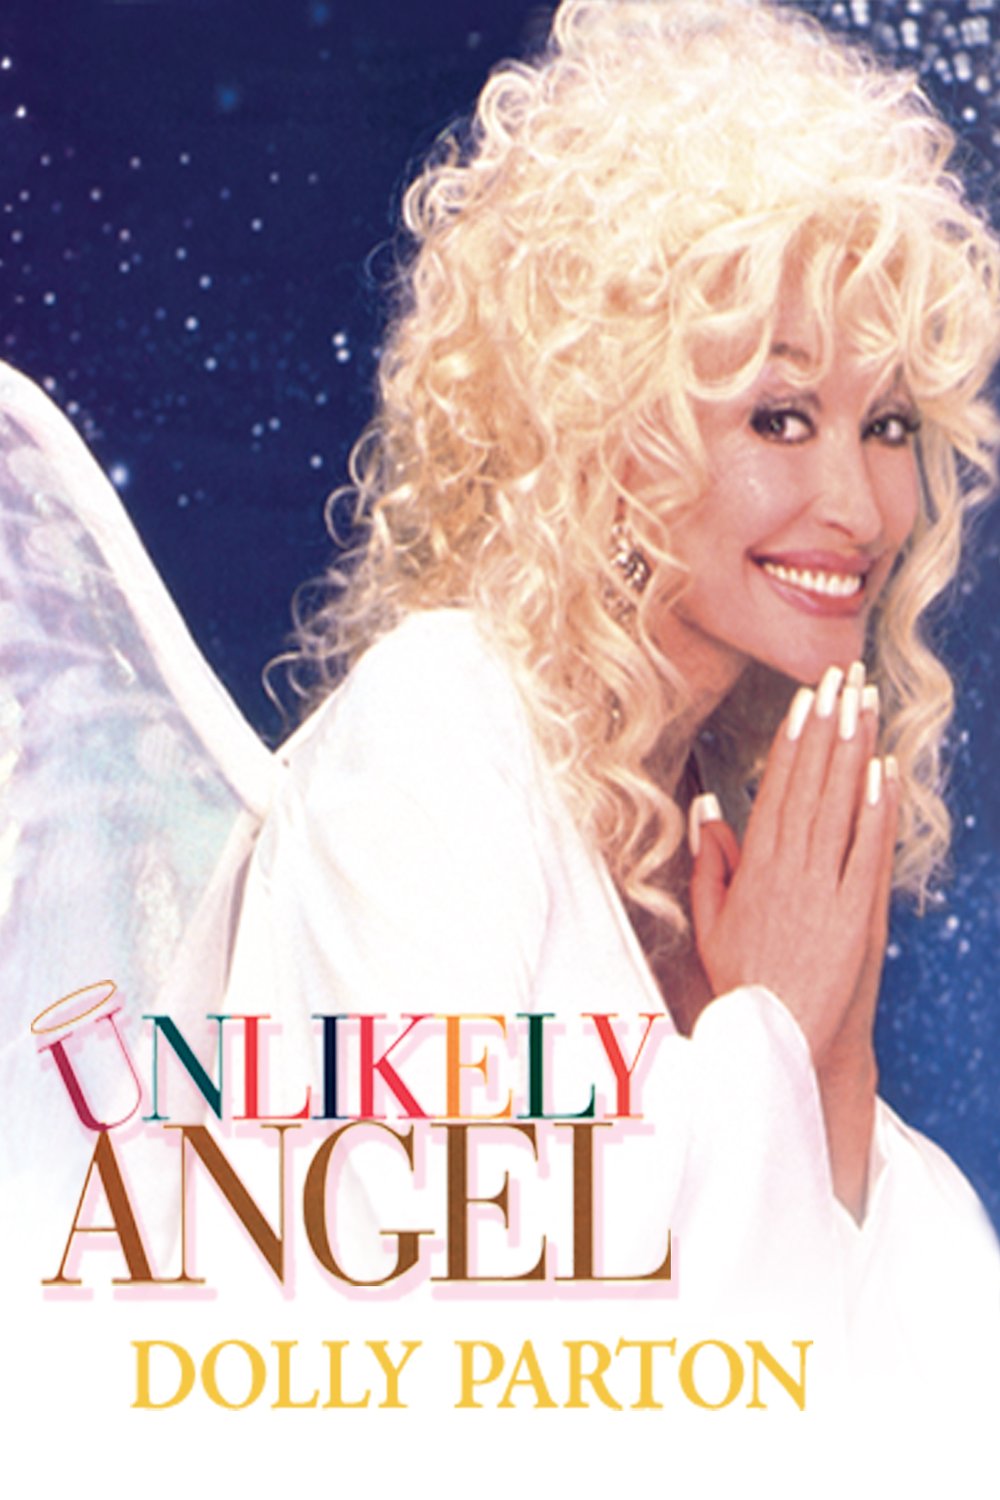 Poster of the movie Unlikely Angel